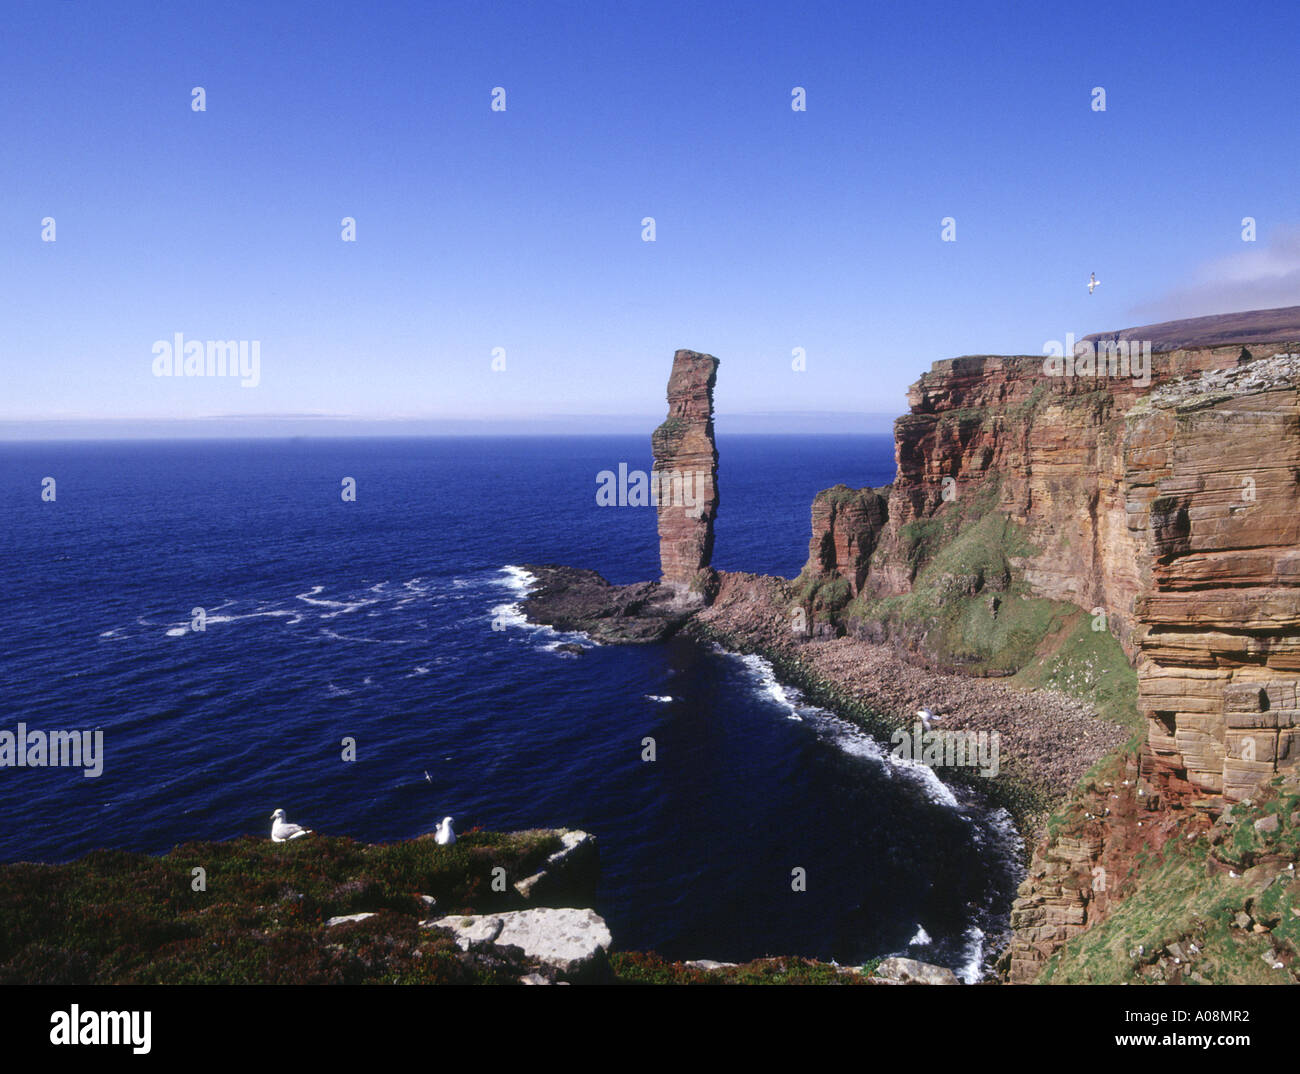 dh Old Man of Hoy HOY ORKNEY Sea stack red sandstone cliffs Fulmar birds clifftop cliff Stock Photo